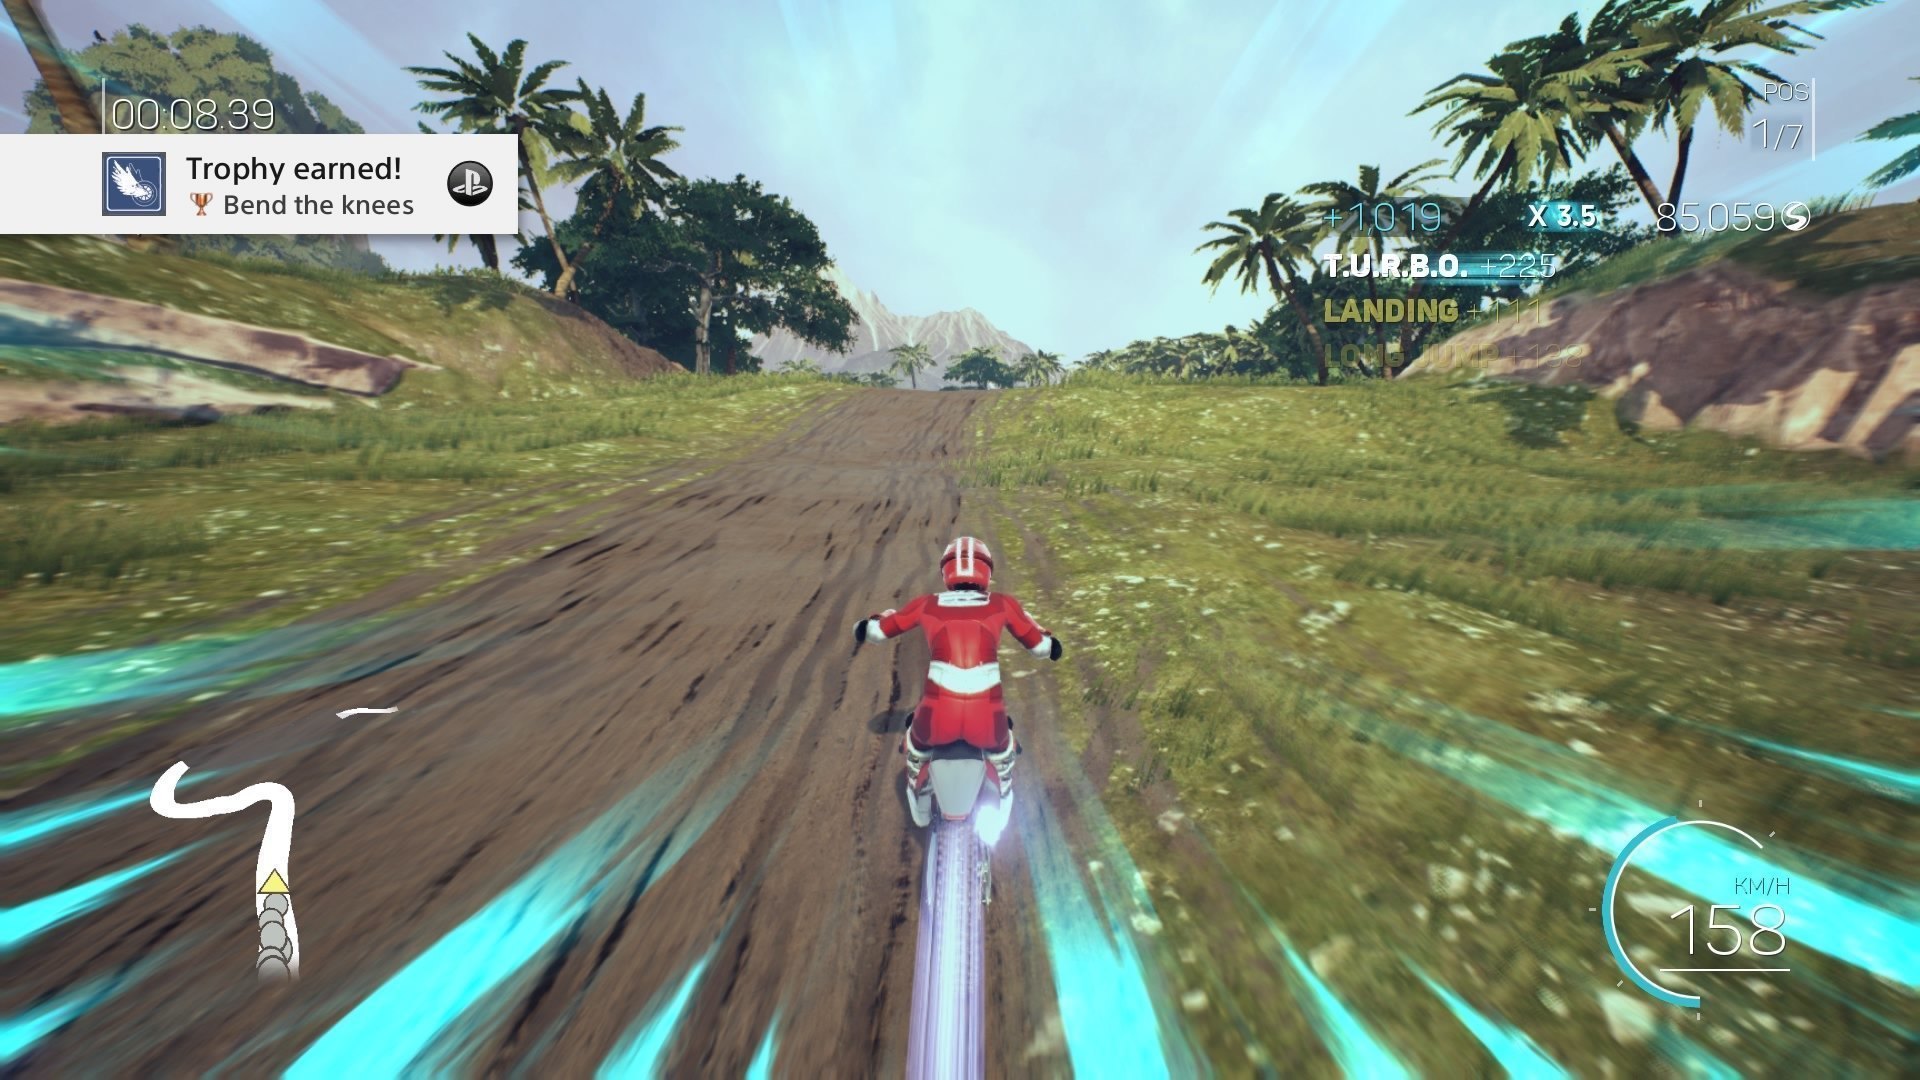 Moto Racer 4 Review (PlayStation 4) - Official GBAtemp Review | GBAtemp.net  - The Independent Video Game Community